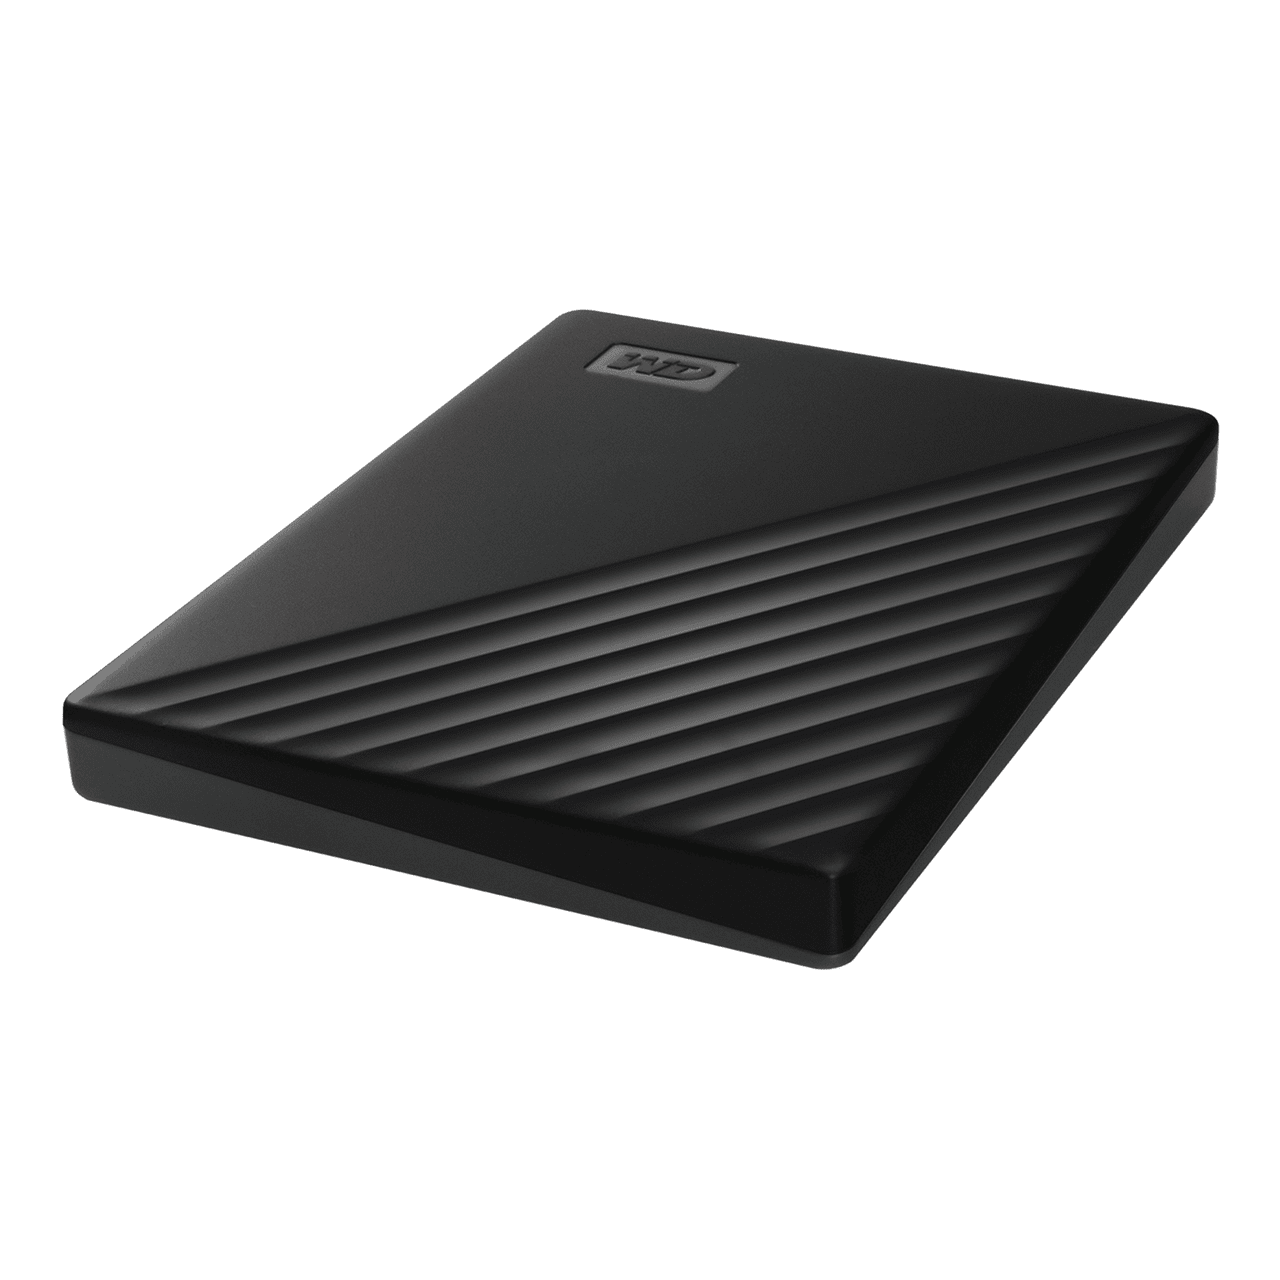 WD Western Digital My Passport  5TB  ( BLACK ) Slim Portable External Hard Disk USB 3.0 With WD Backup Software & Password Protection